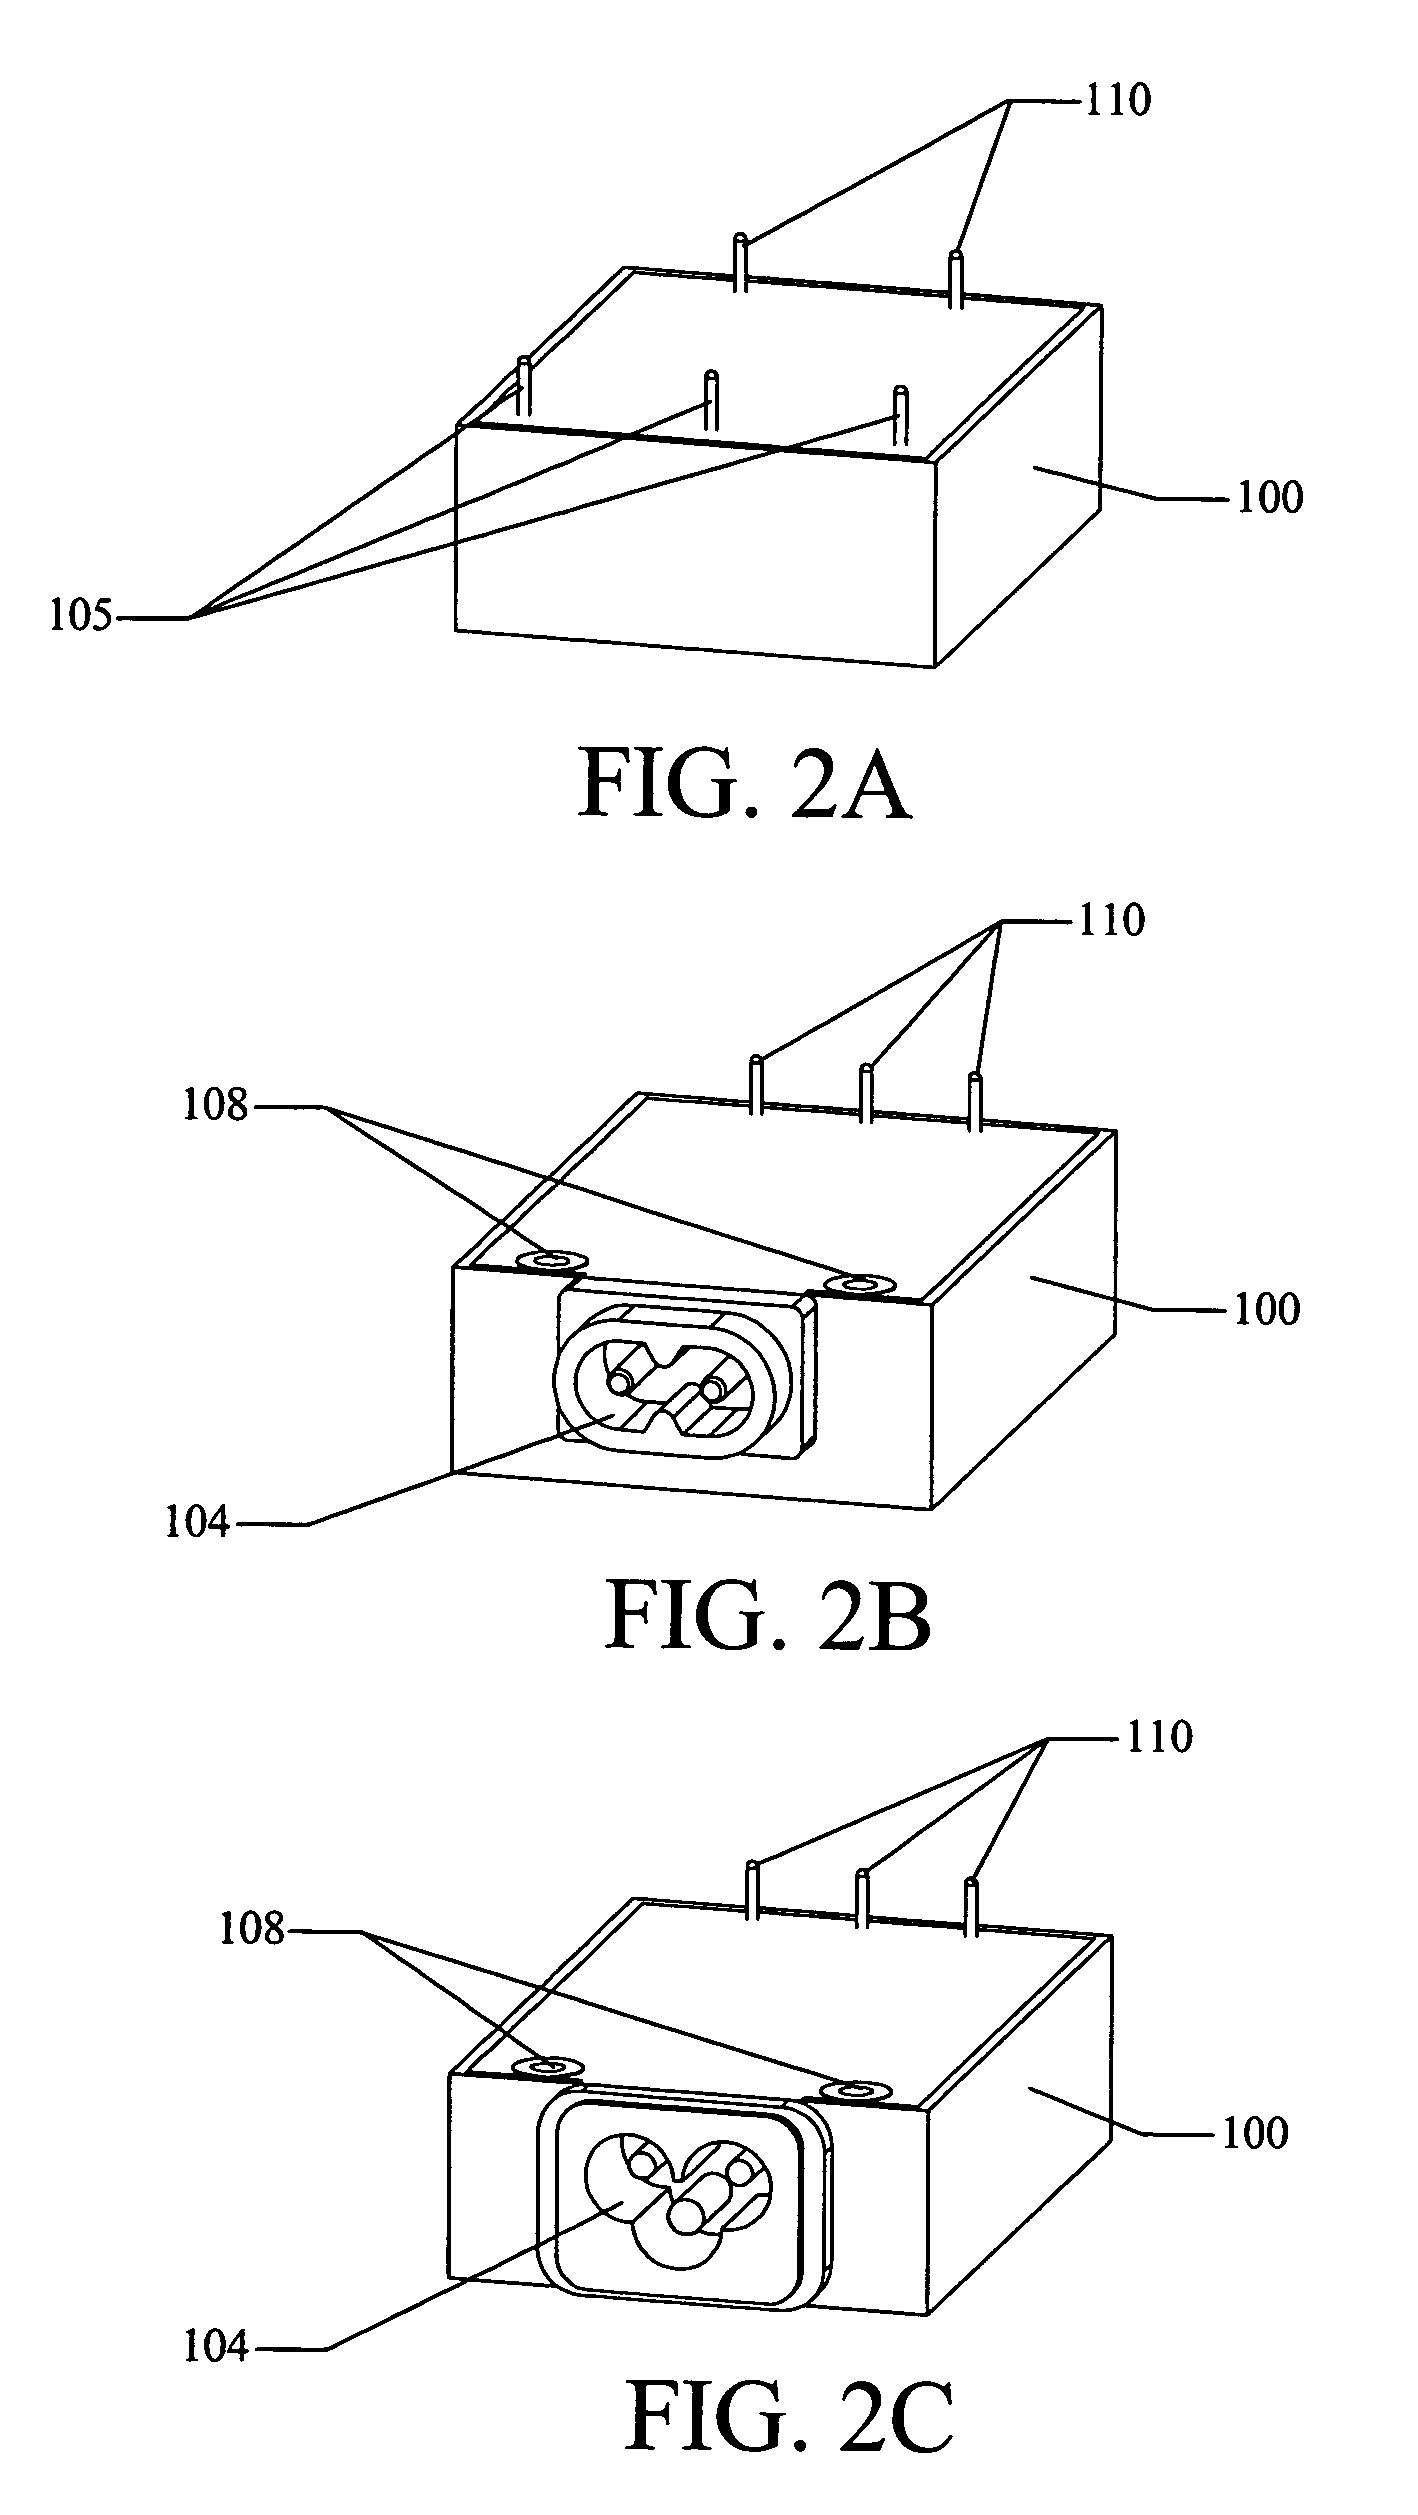 Encapsulated electronic power converter with embedded AC components